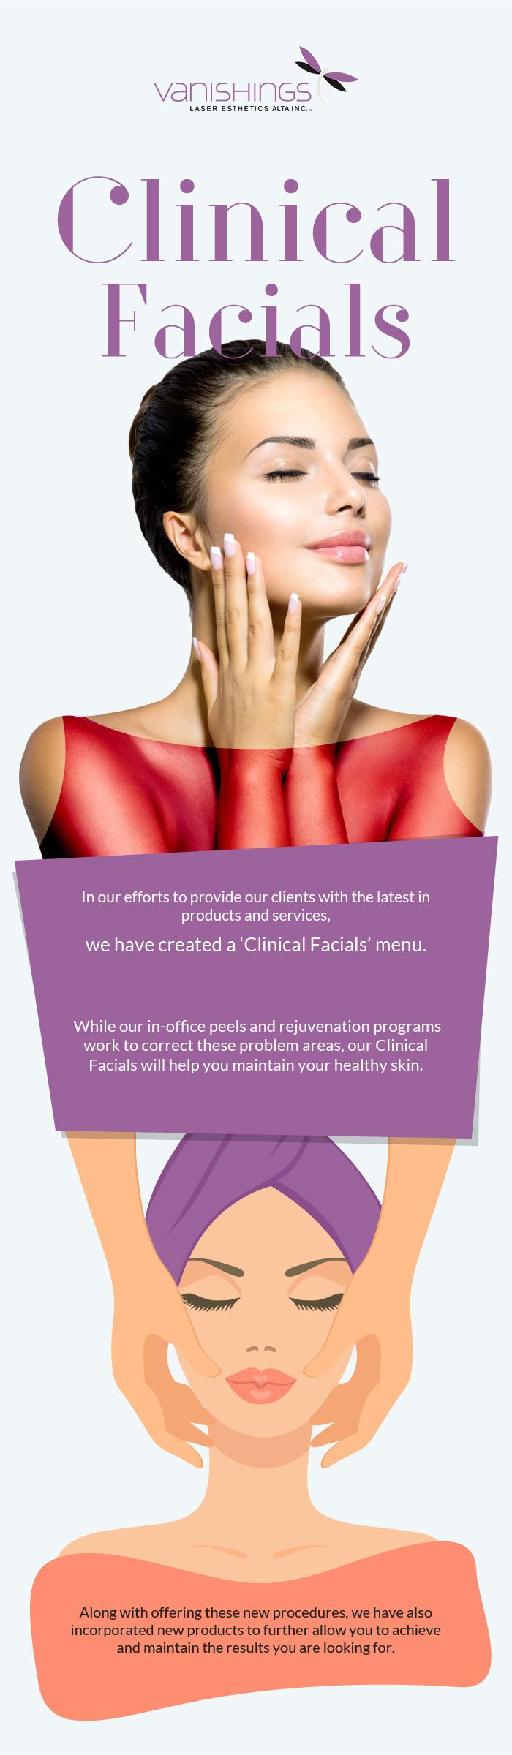 Maintain Your Healthy Skin with Clinical Facials